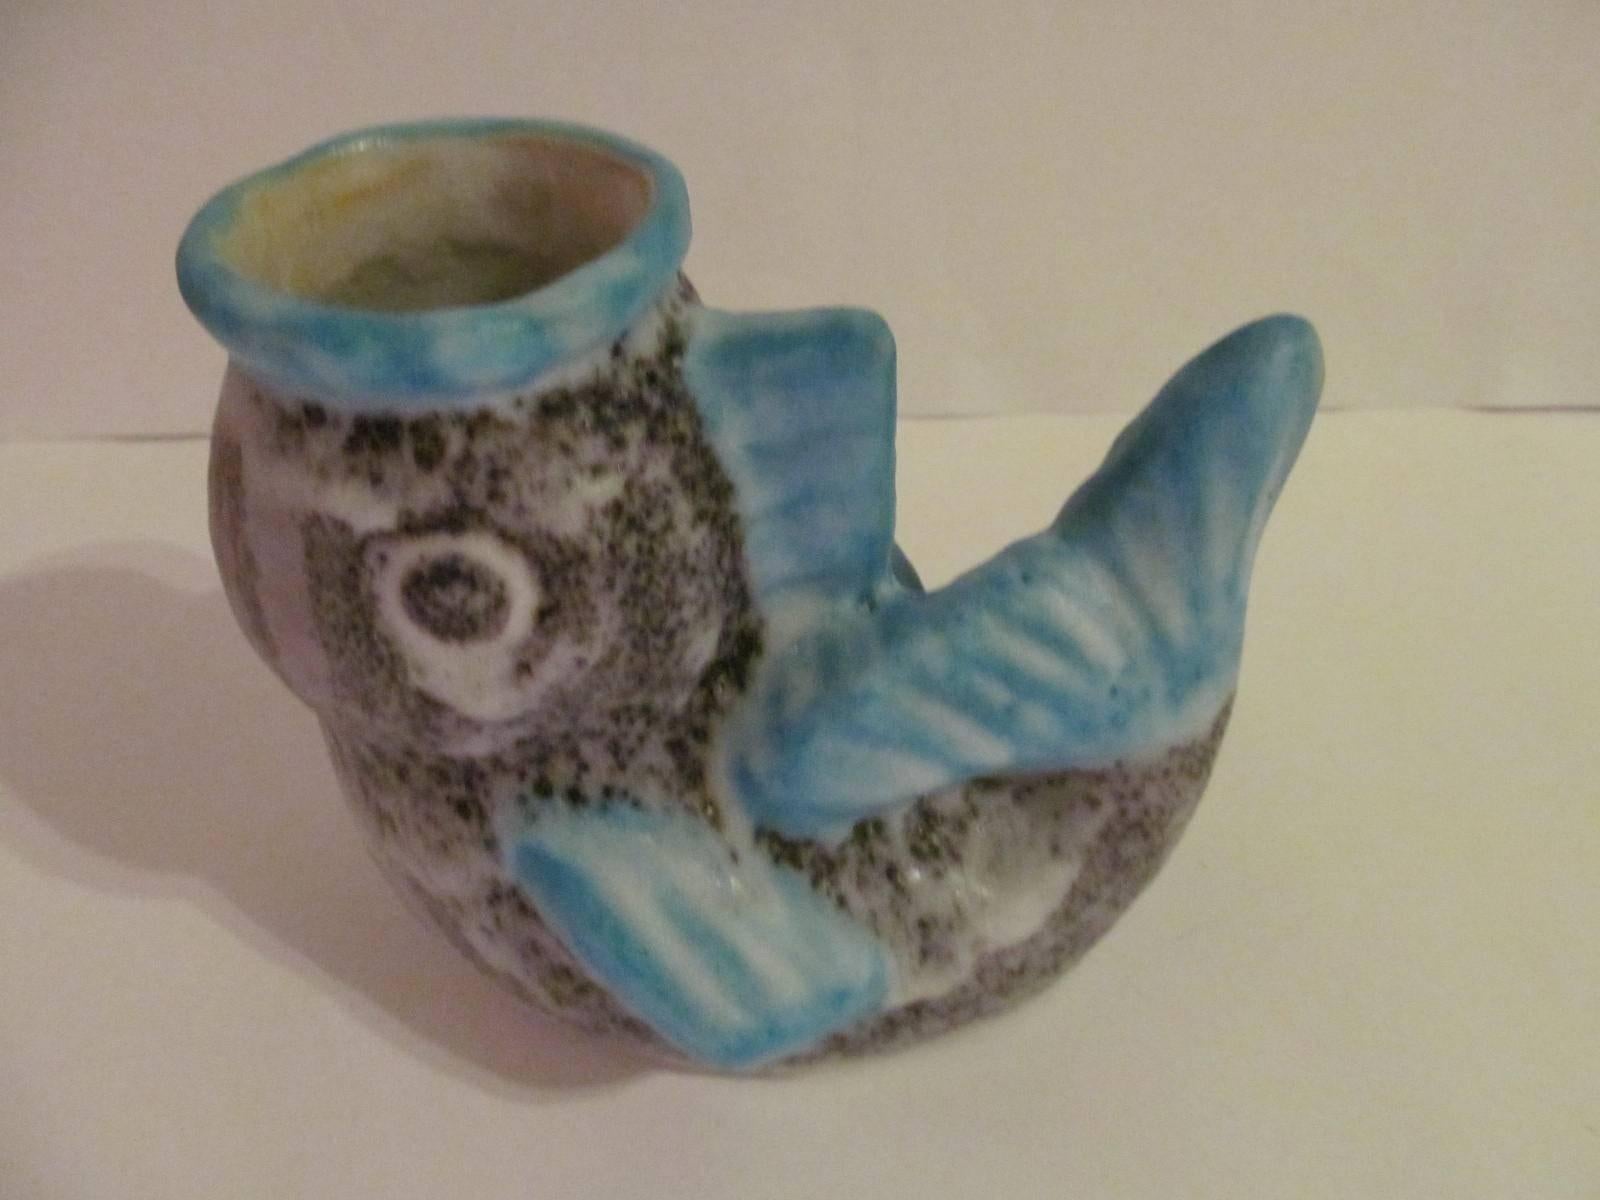 Sculptural fish vase in pottery by C.A.S., circa 1950s.